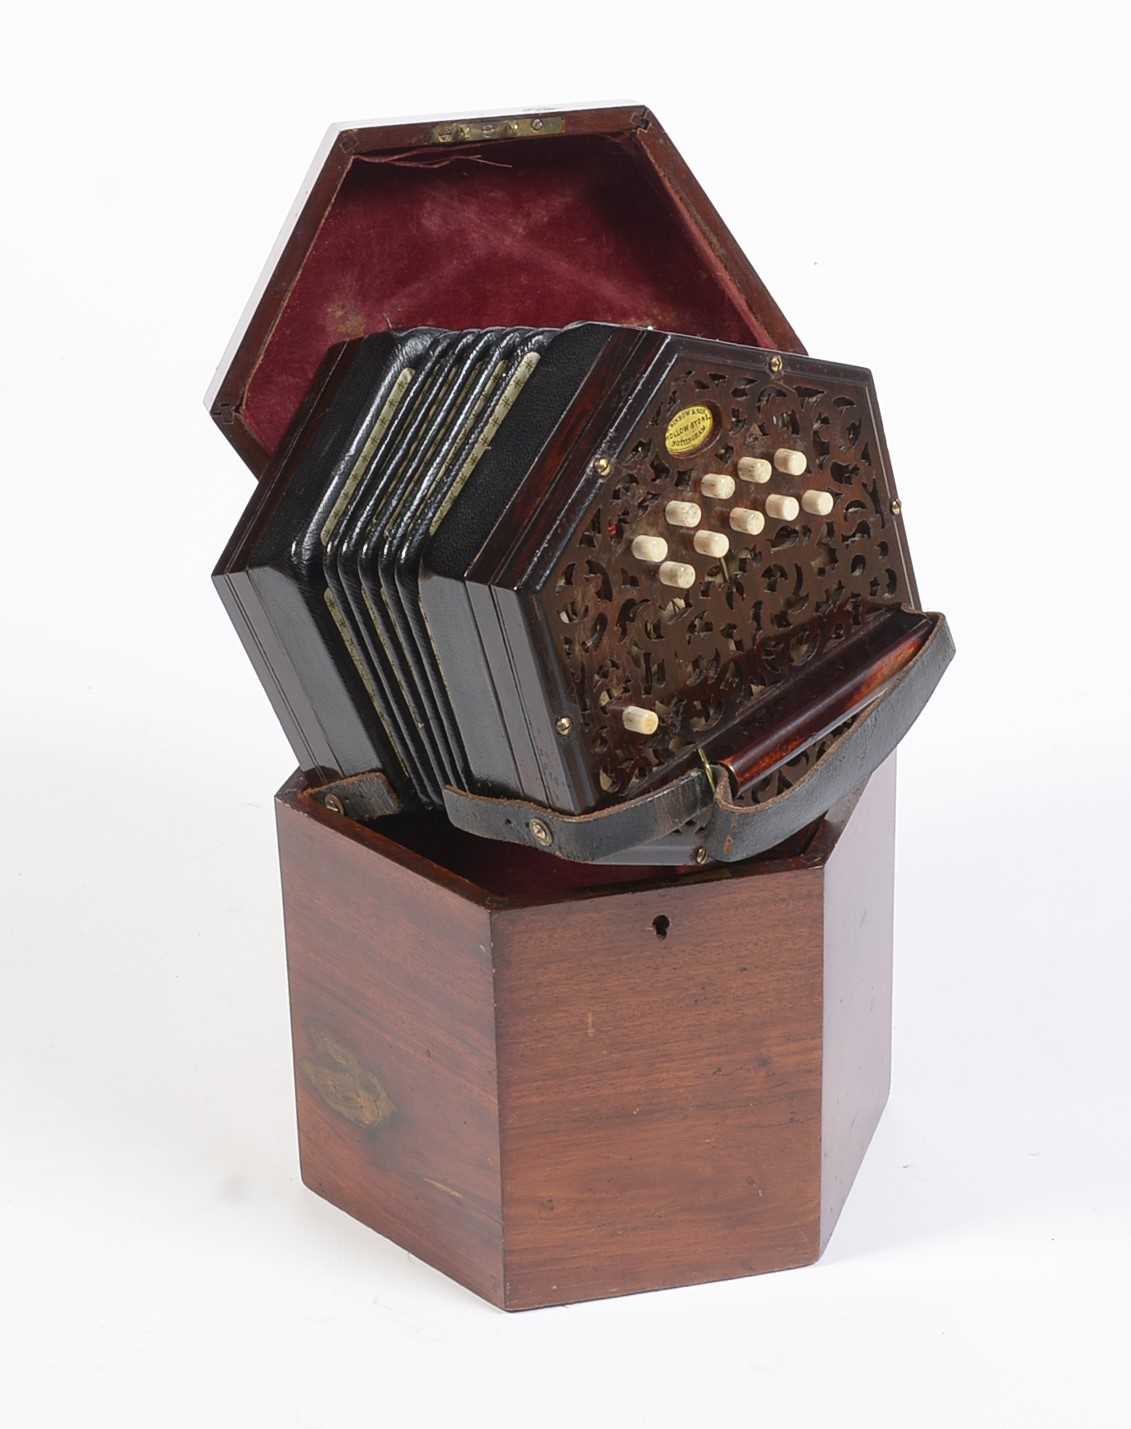 Lachenal 20 button Anglo system concertina - Image 12 of 14